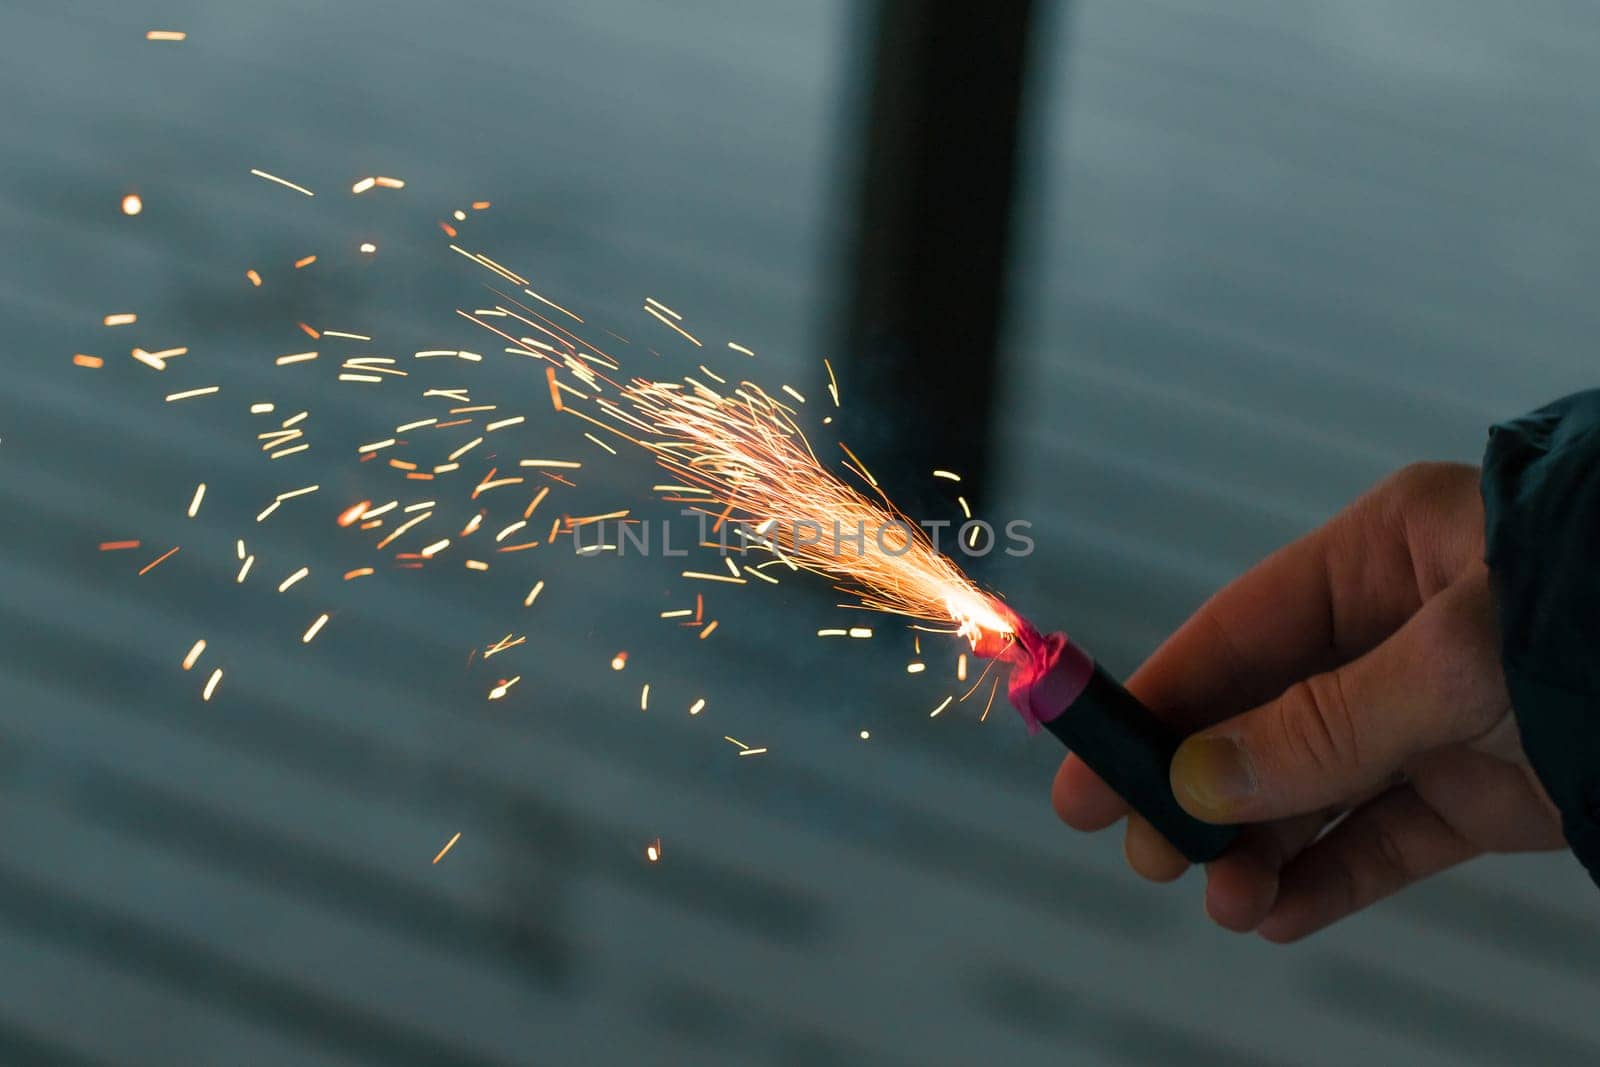 Burning Firecracker with Sparks. Guy Holding a Petard in a Hand by InfinitumProdux